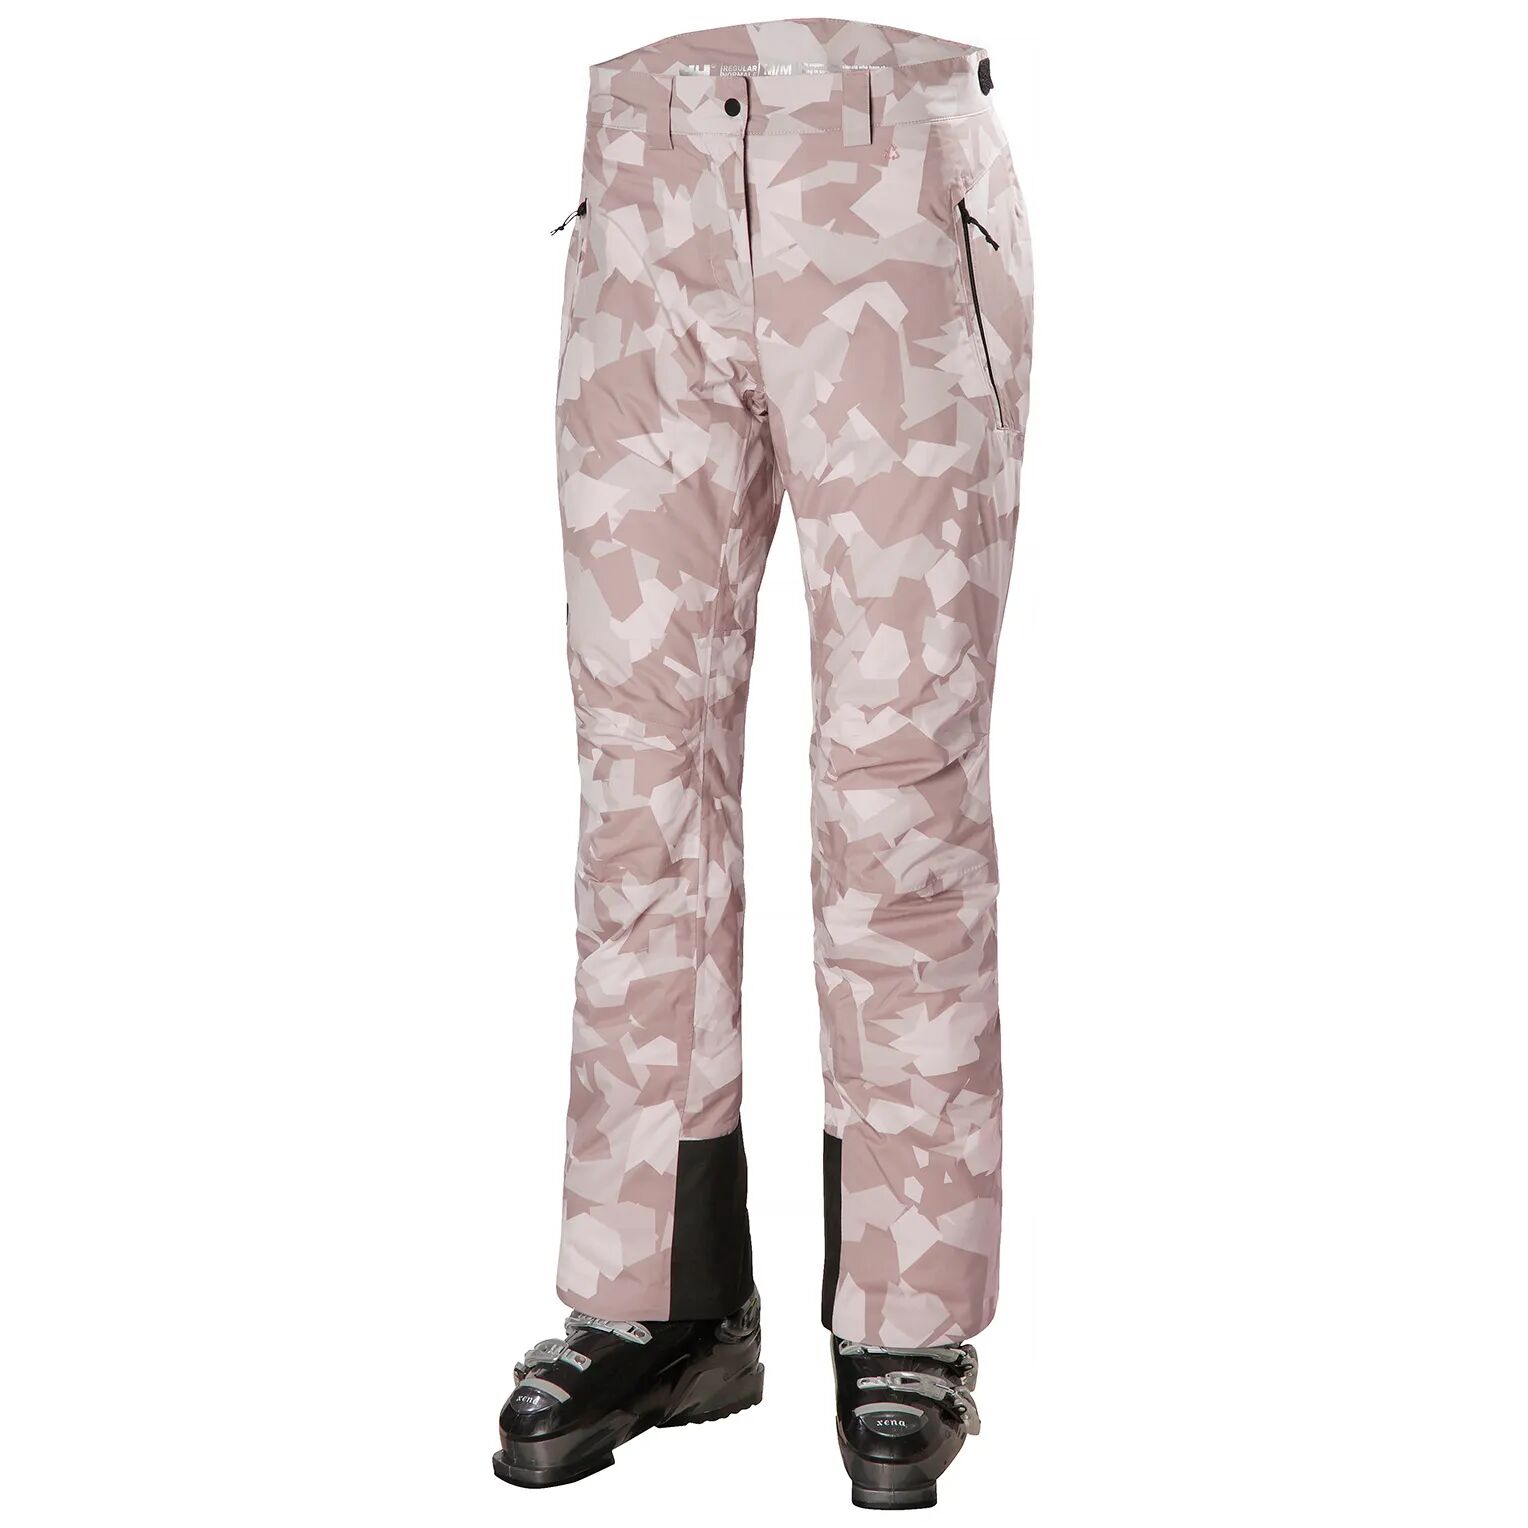 Helly Hansen Dame Snowstar Mono Material Trousers Skibukse Rosa L